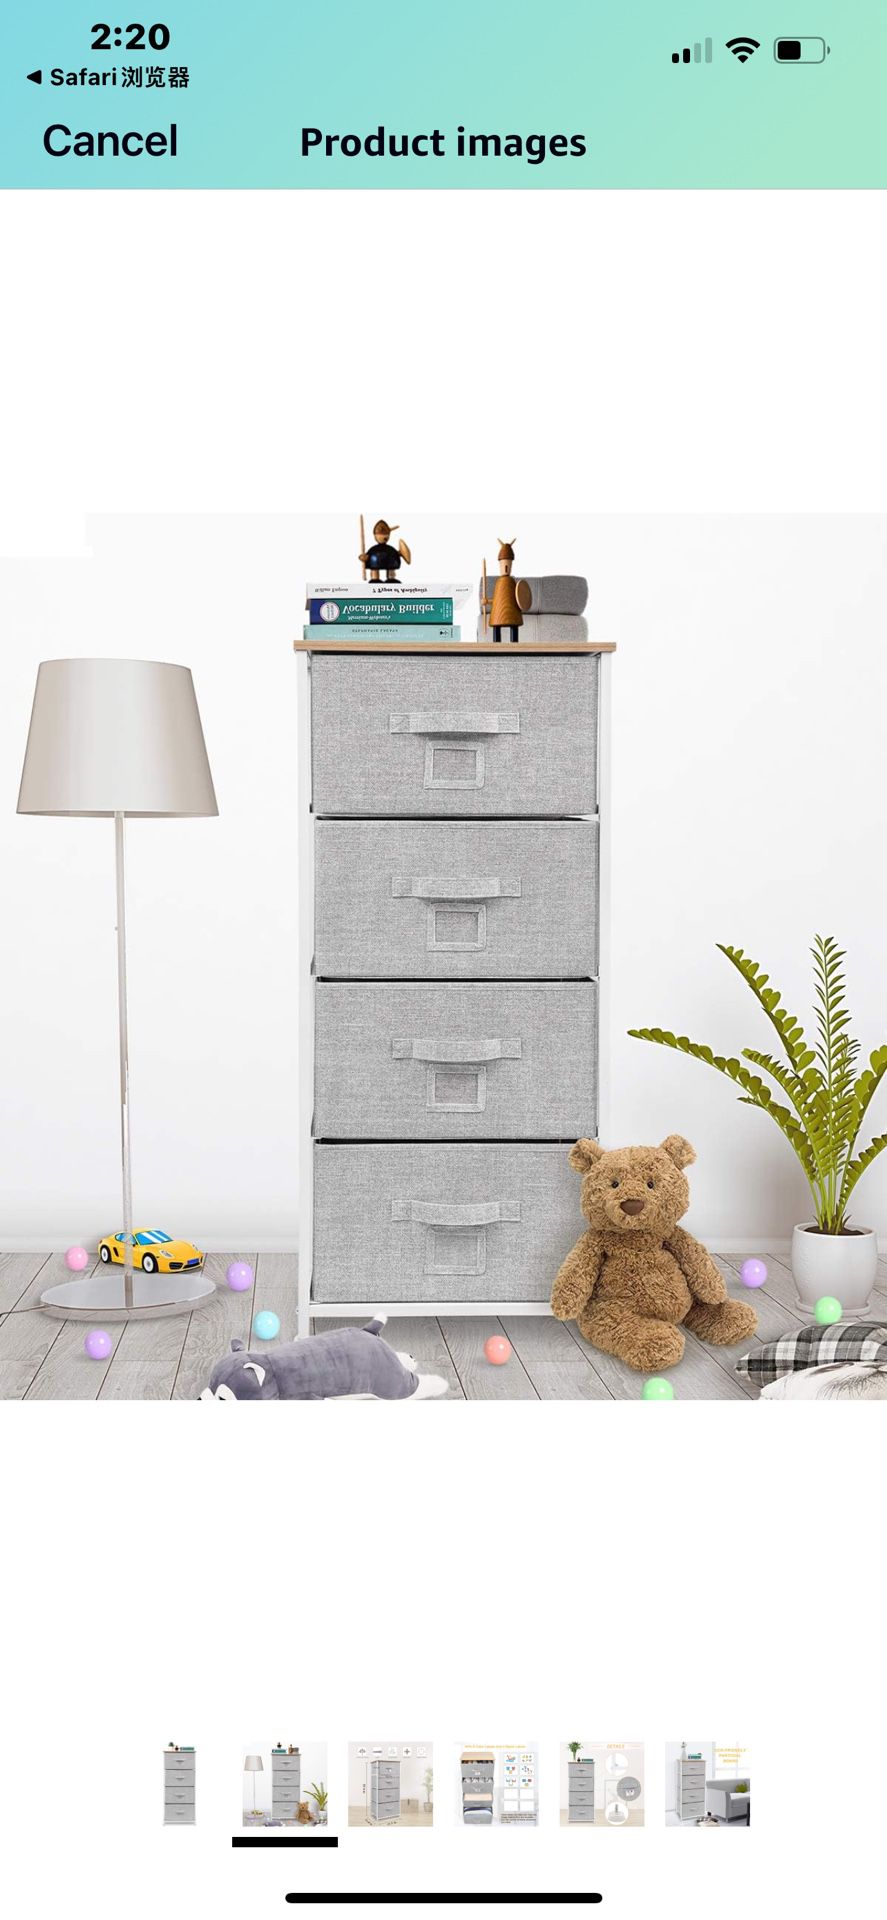 Bigroof Dresser for Bedroom Storage Organizer Fabric Dresser for Closet Chest of Drawers - Steel Frame Wood Top Gray